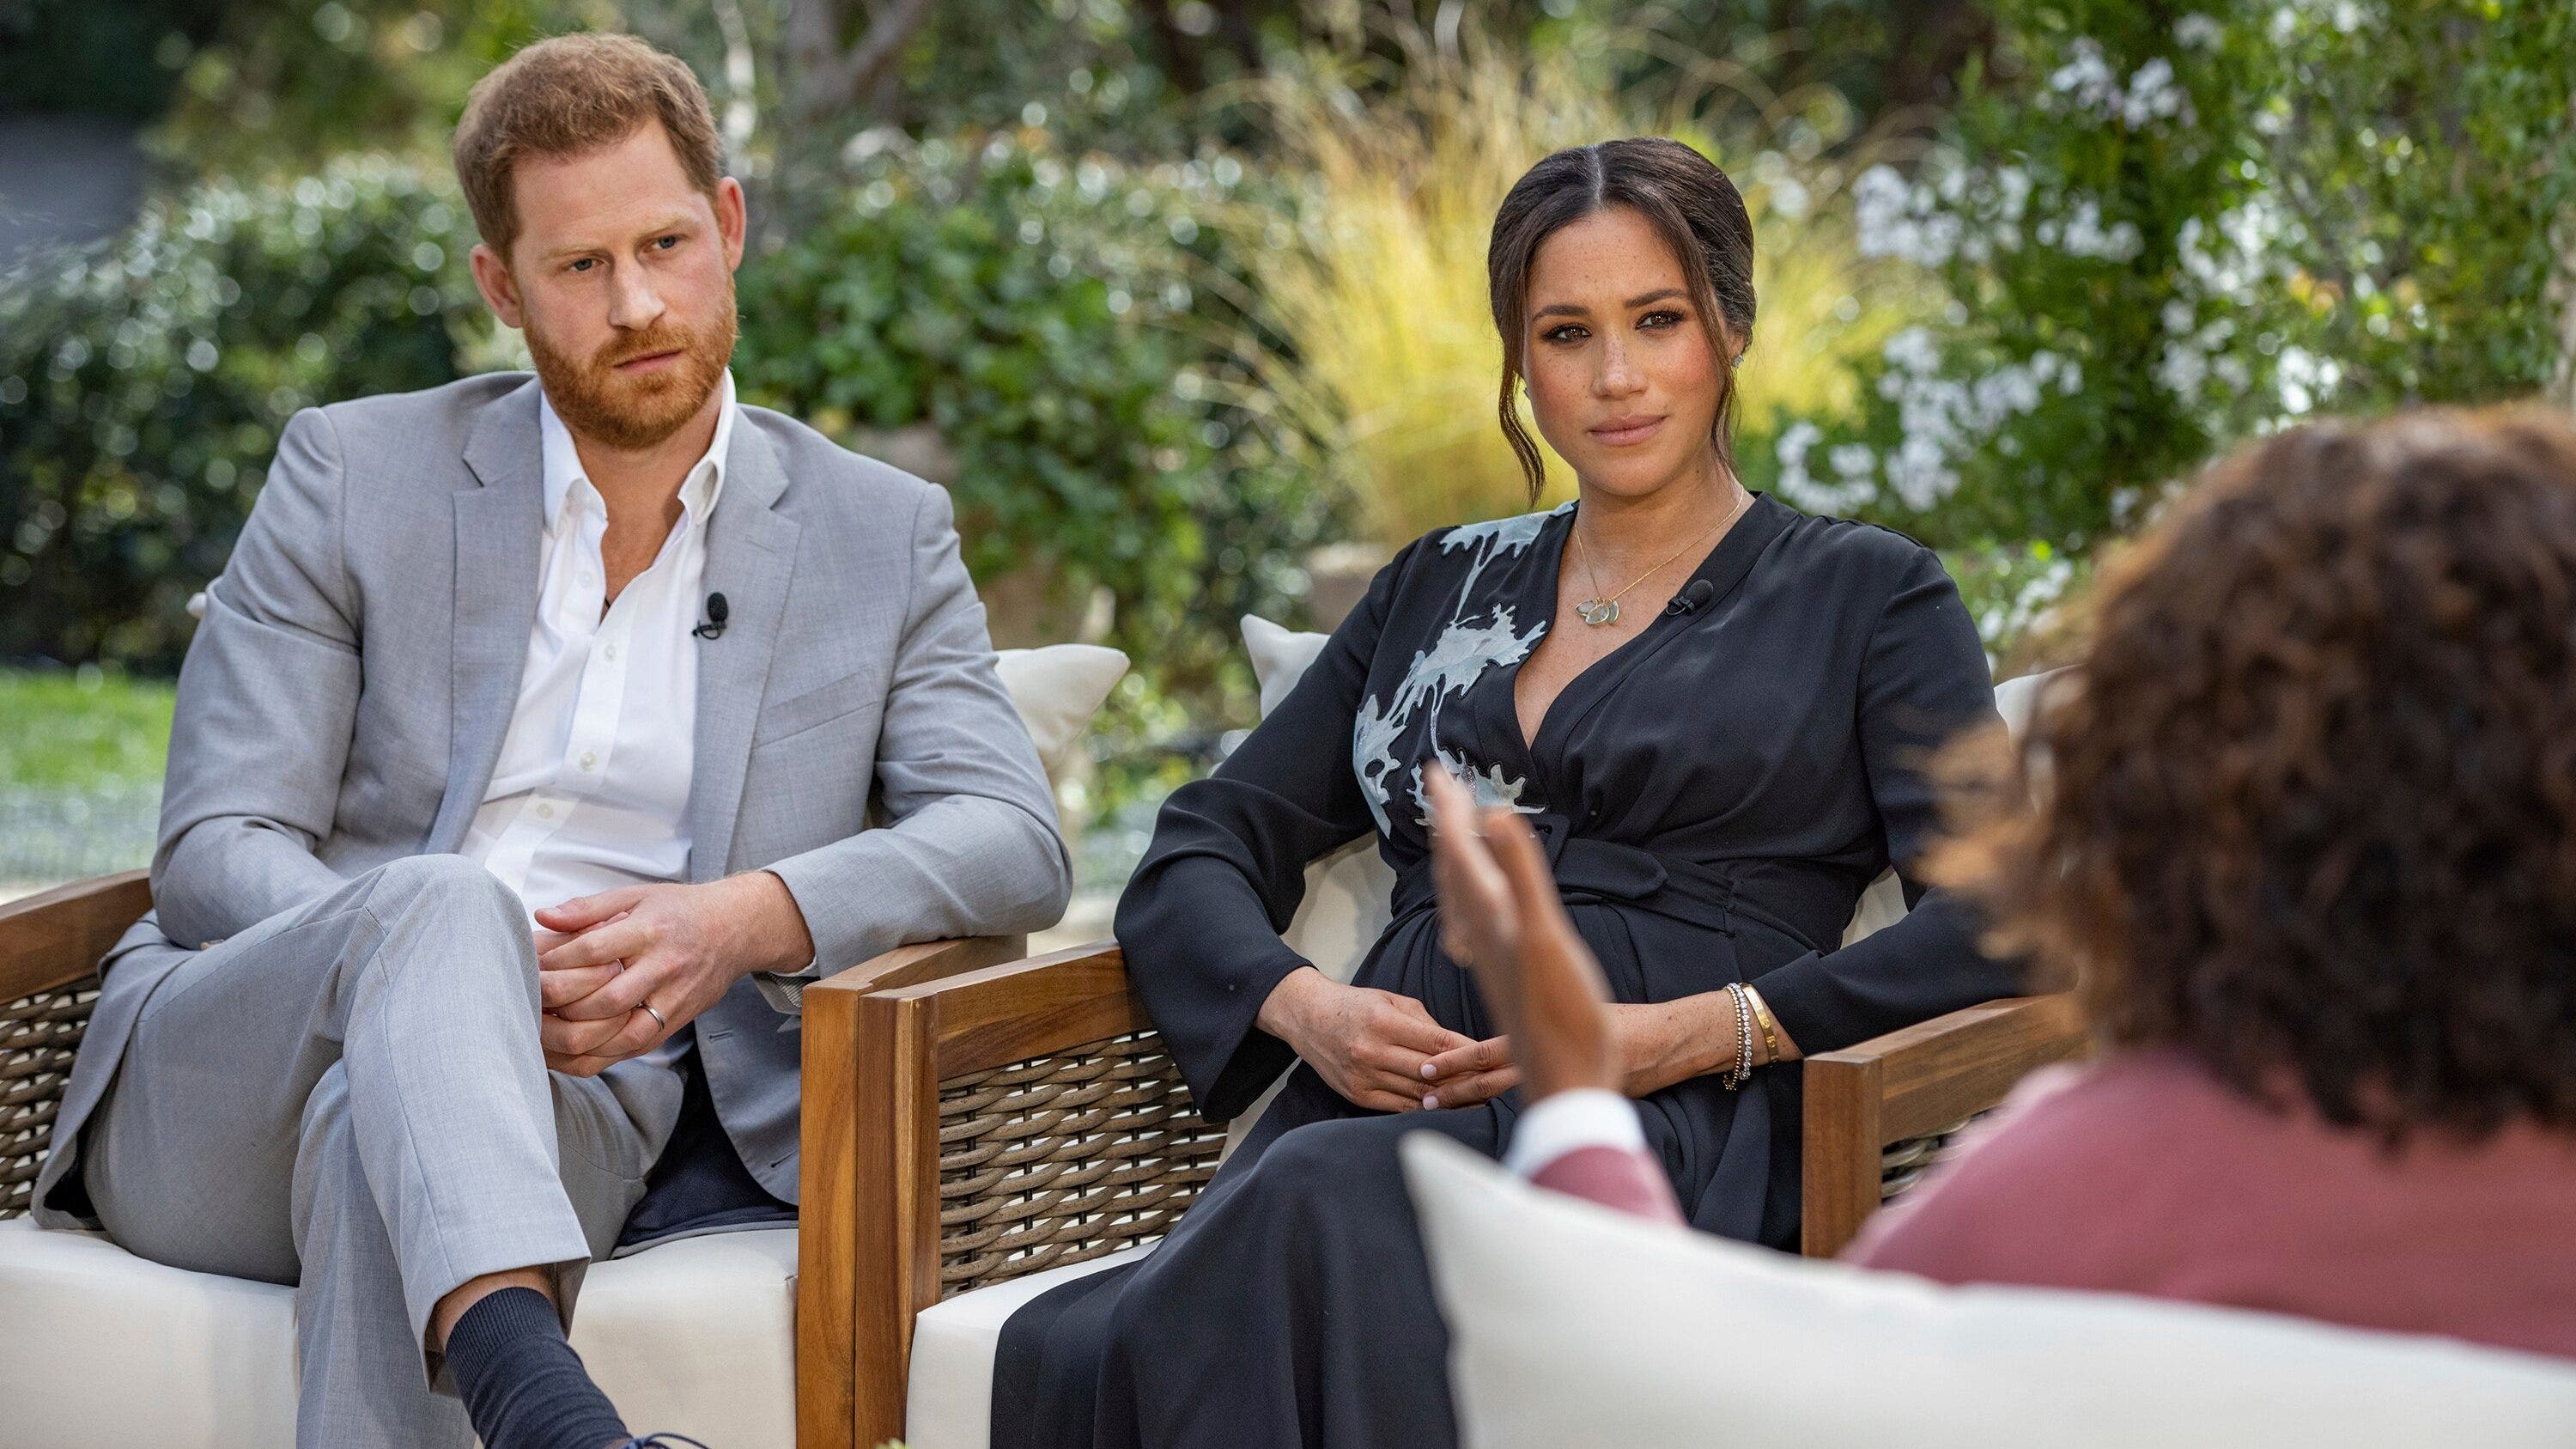 With Oprah’s interview with Meghan and Harry airing on Sunday, some critics are already tired of the real craze